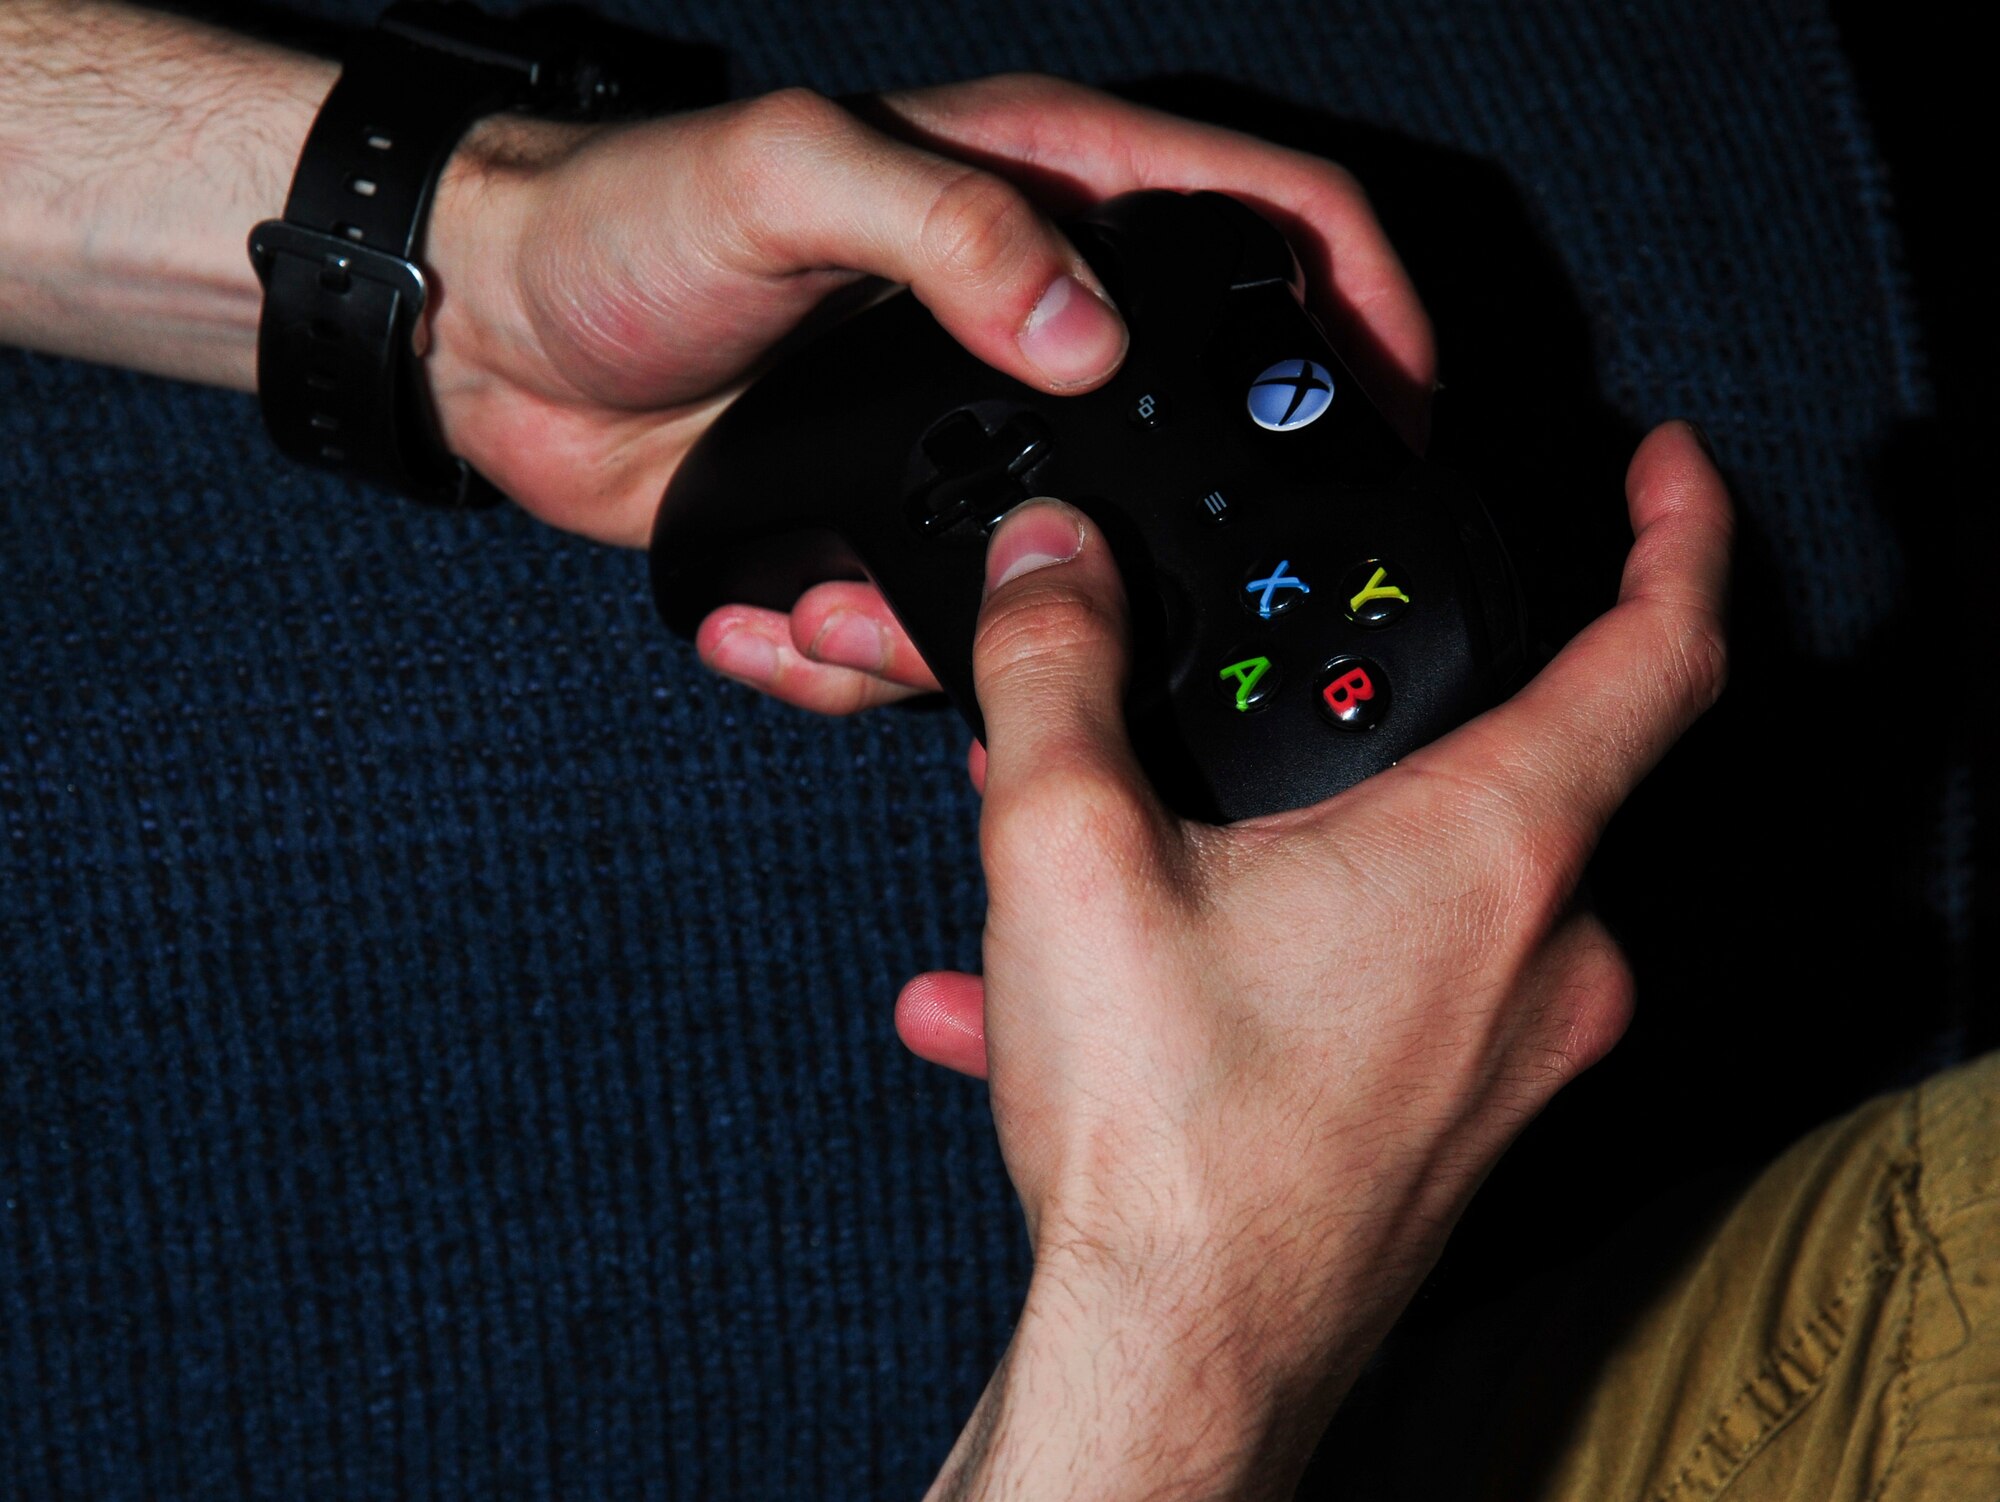 A Grand Forks Air Force Base Airman handles an Xbox One controller May 28, 2015, in a dormitory dayroom on Grand Forks Air Force Base, N.D. Gaming has become a popular way for Airmen to connect outside of duty hours. Video games test the gamer’s hand-eye coordination and provide an alternative to outdoor activities. (U.S. Air Force photo by Airman 1st Class Ryan Sparks/released)